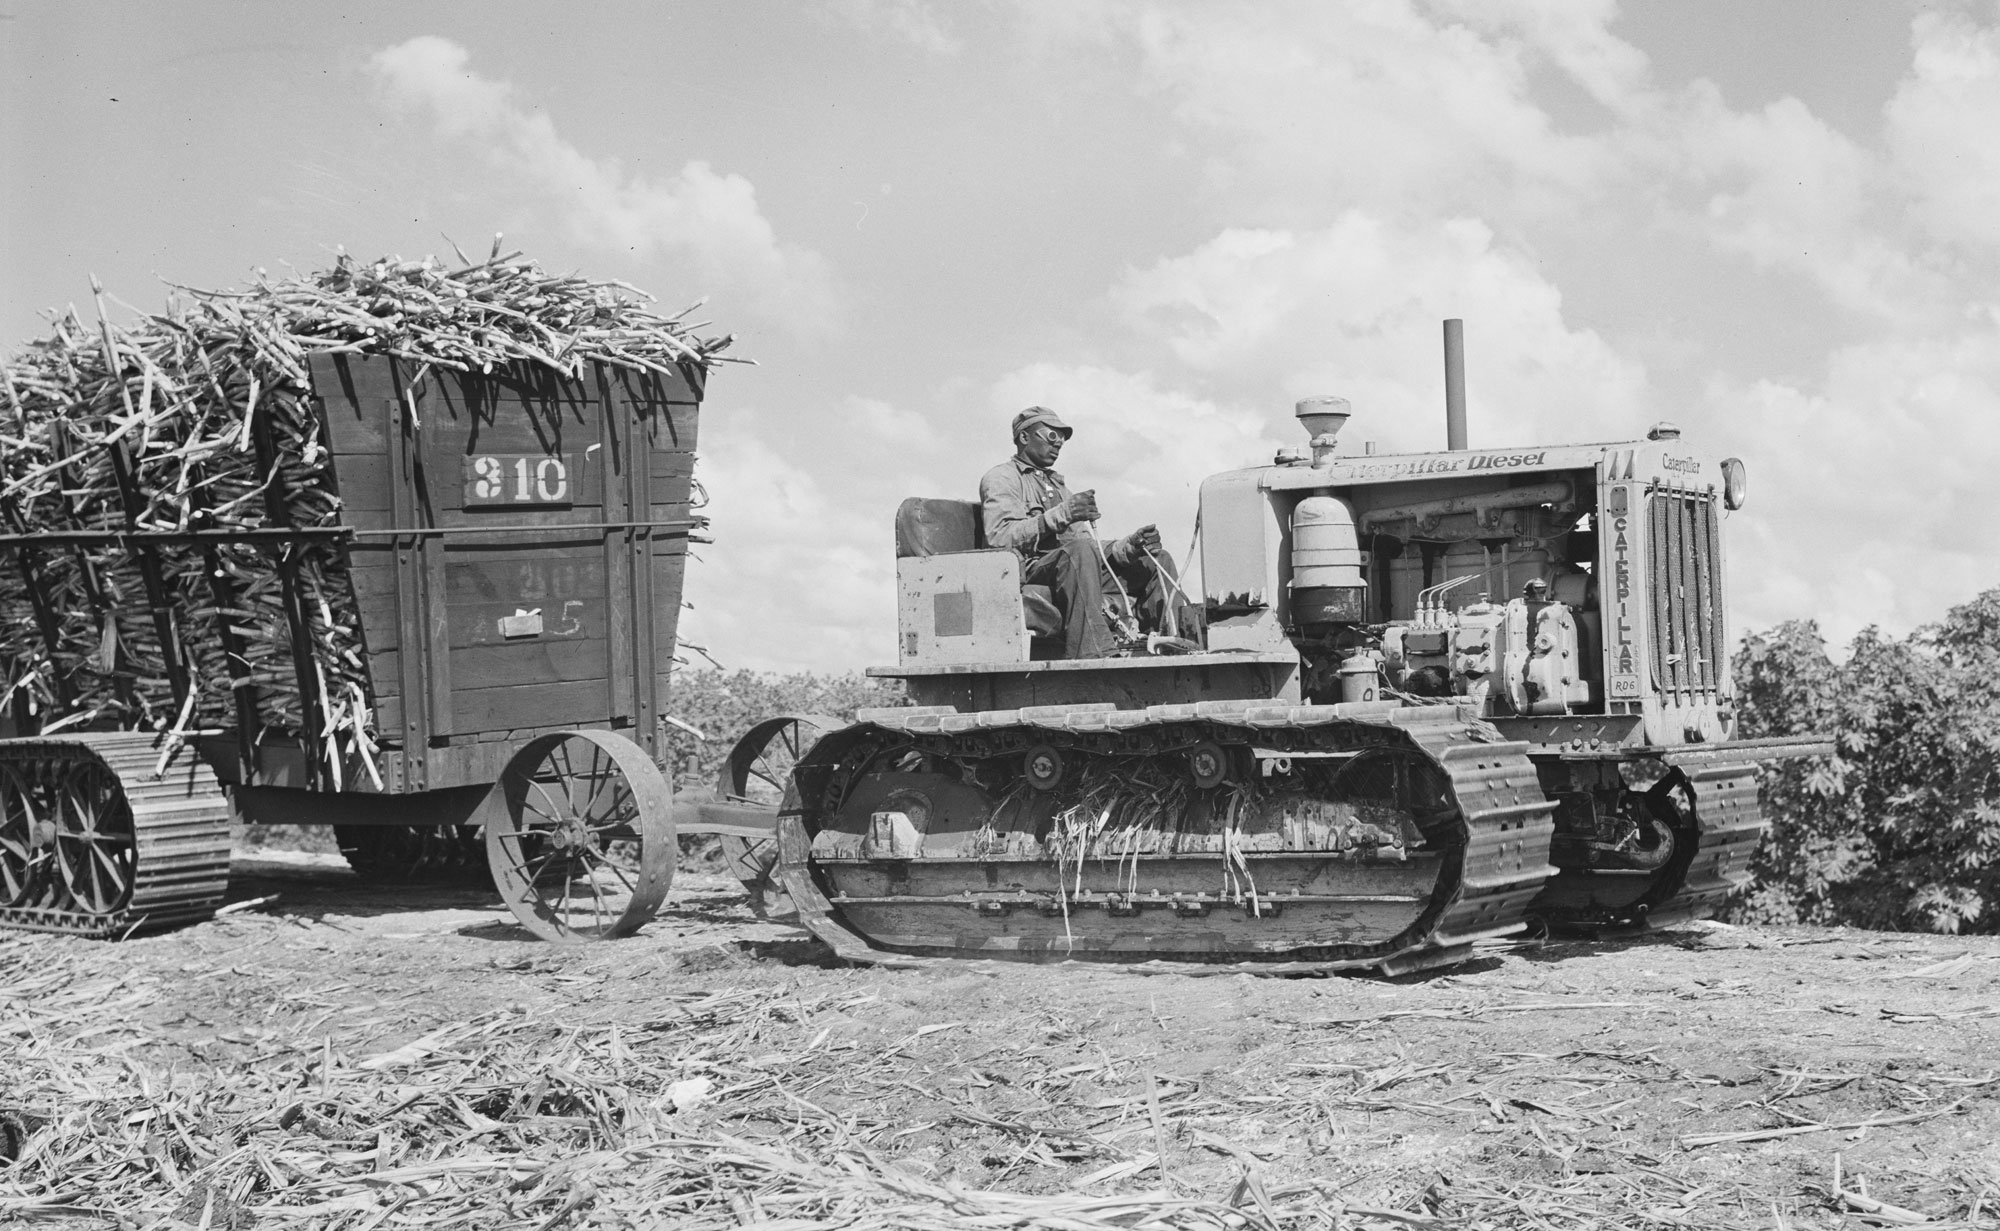 Black and white photograph showing the hauling of harvested sugarcane in Florida, 1939. In the photo, a man sits of a tractor running on treadmills instead of wheels. The tractor is pulling a wagon, also with treads, that is piled high with sugarcane. 